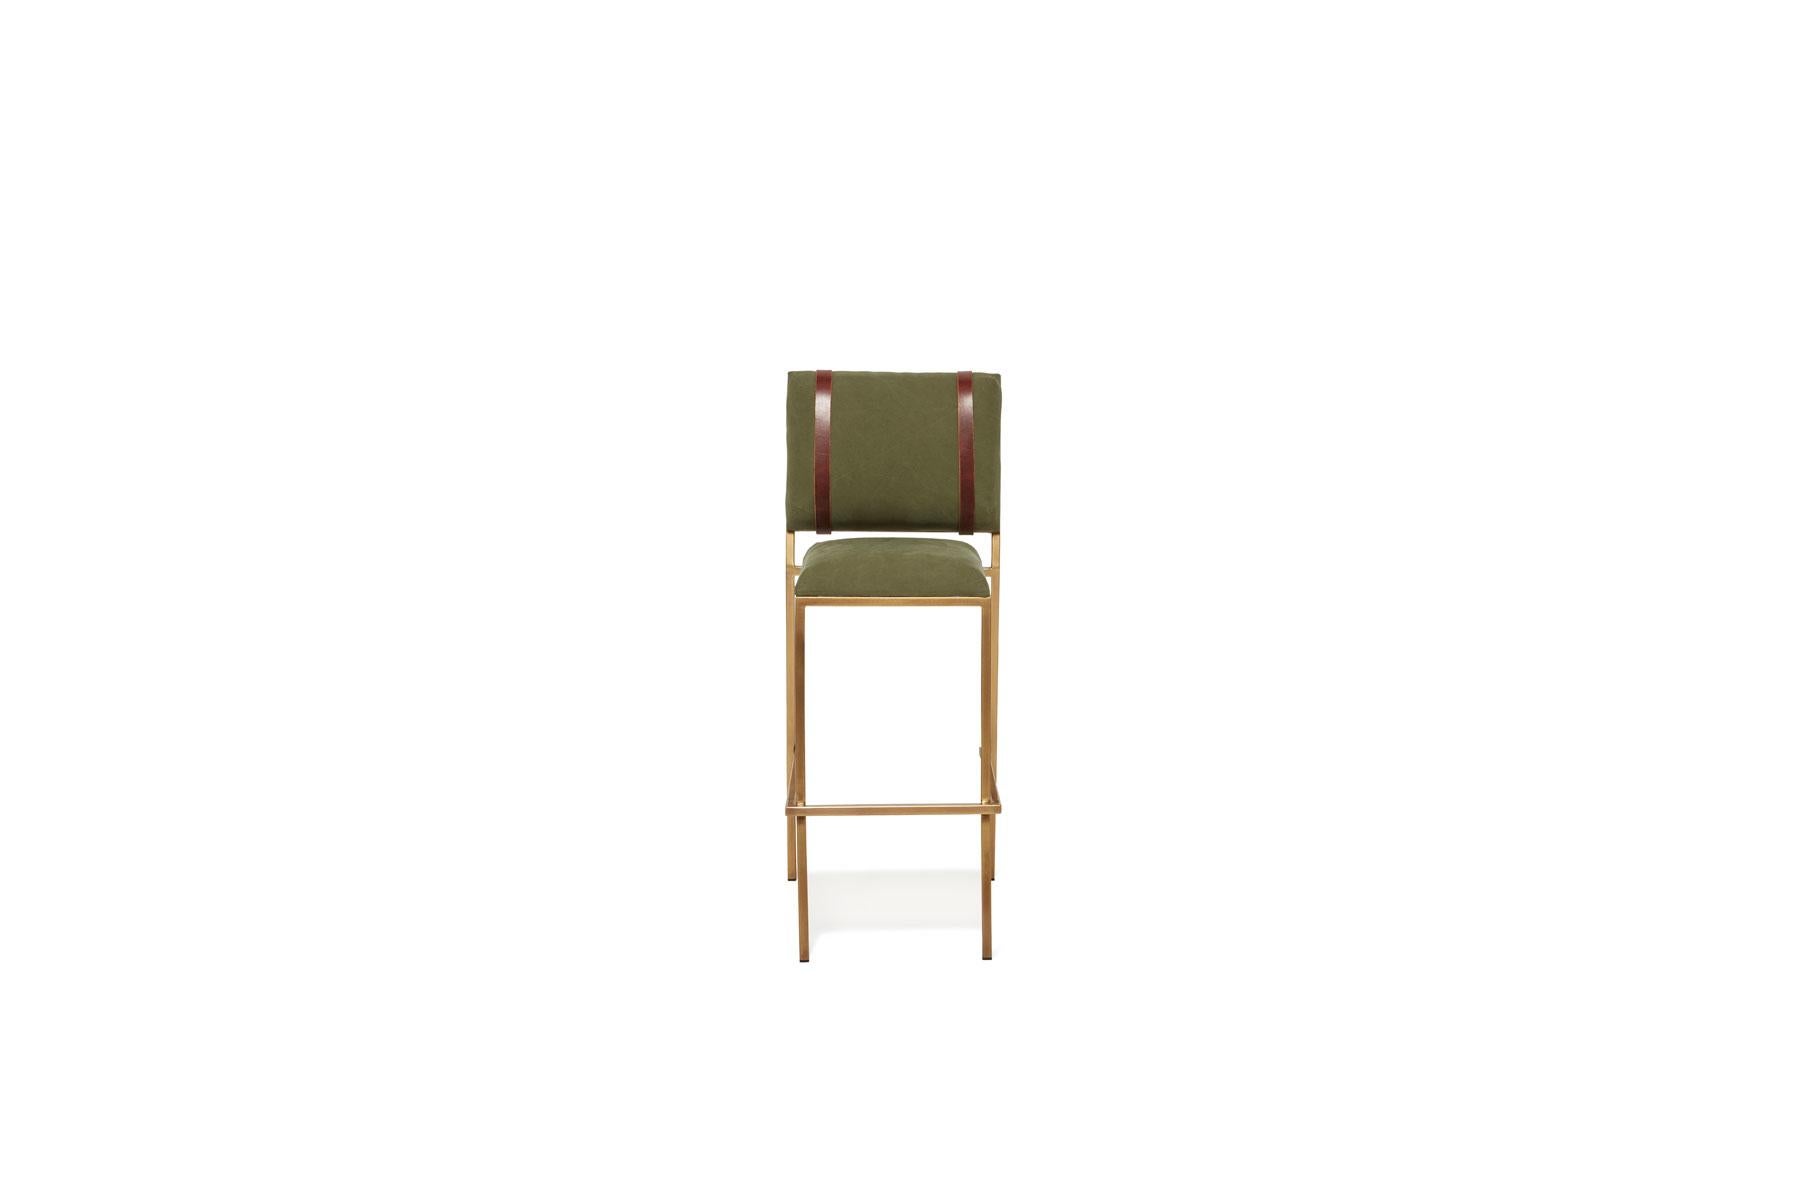 The Inheritance Barstool by Stephen Kenn is comfortable, stackable, and extensively customizable. It has been designed to withstand the rigors of a bar or restaurant environment, while still elegant enough to fit well in a residential home.